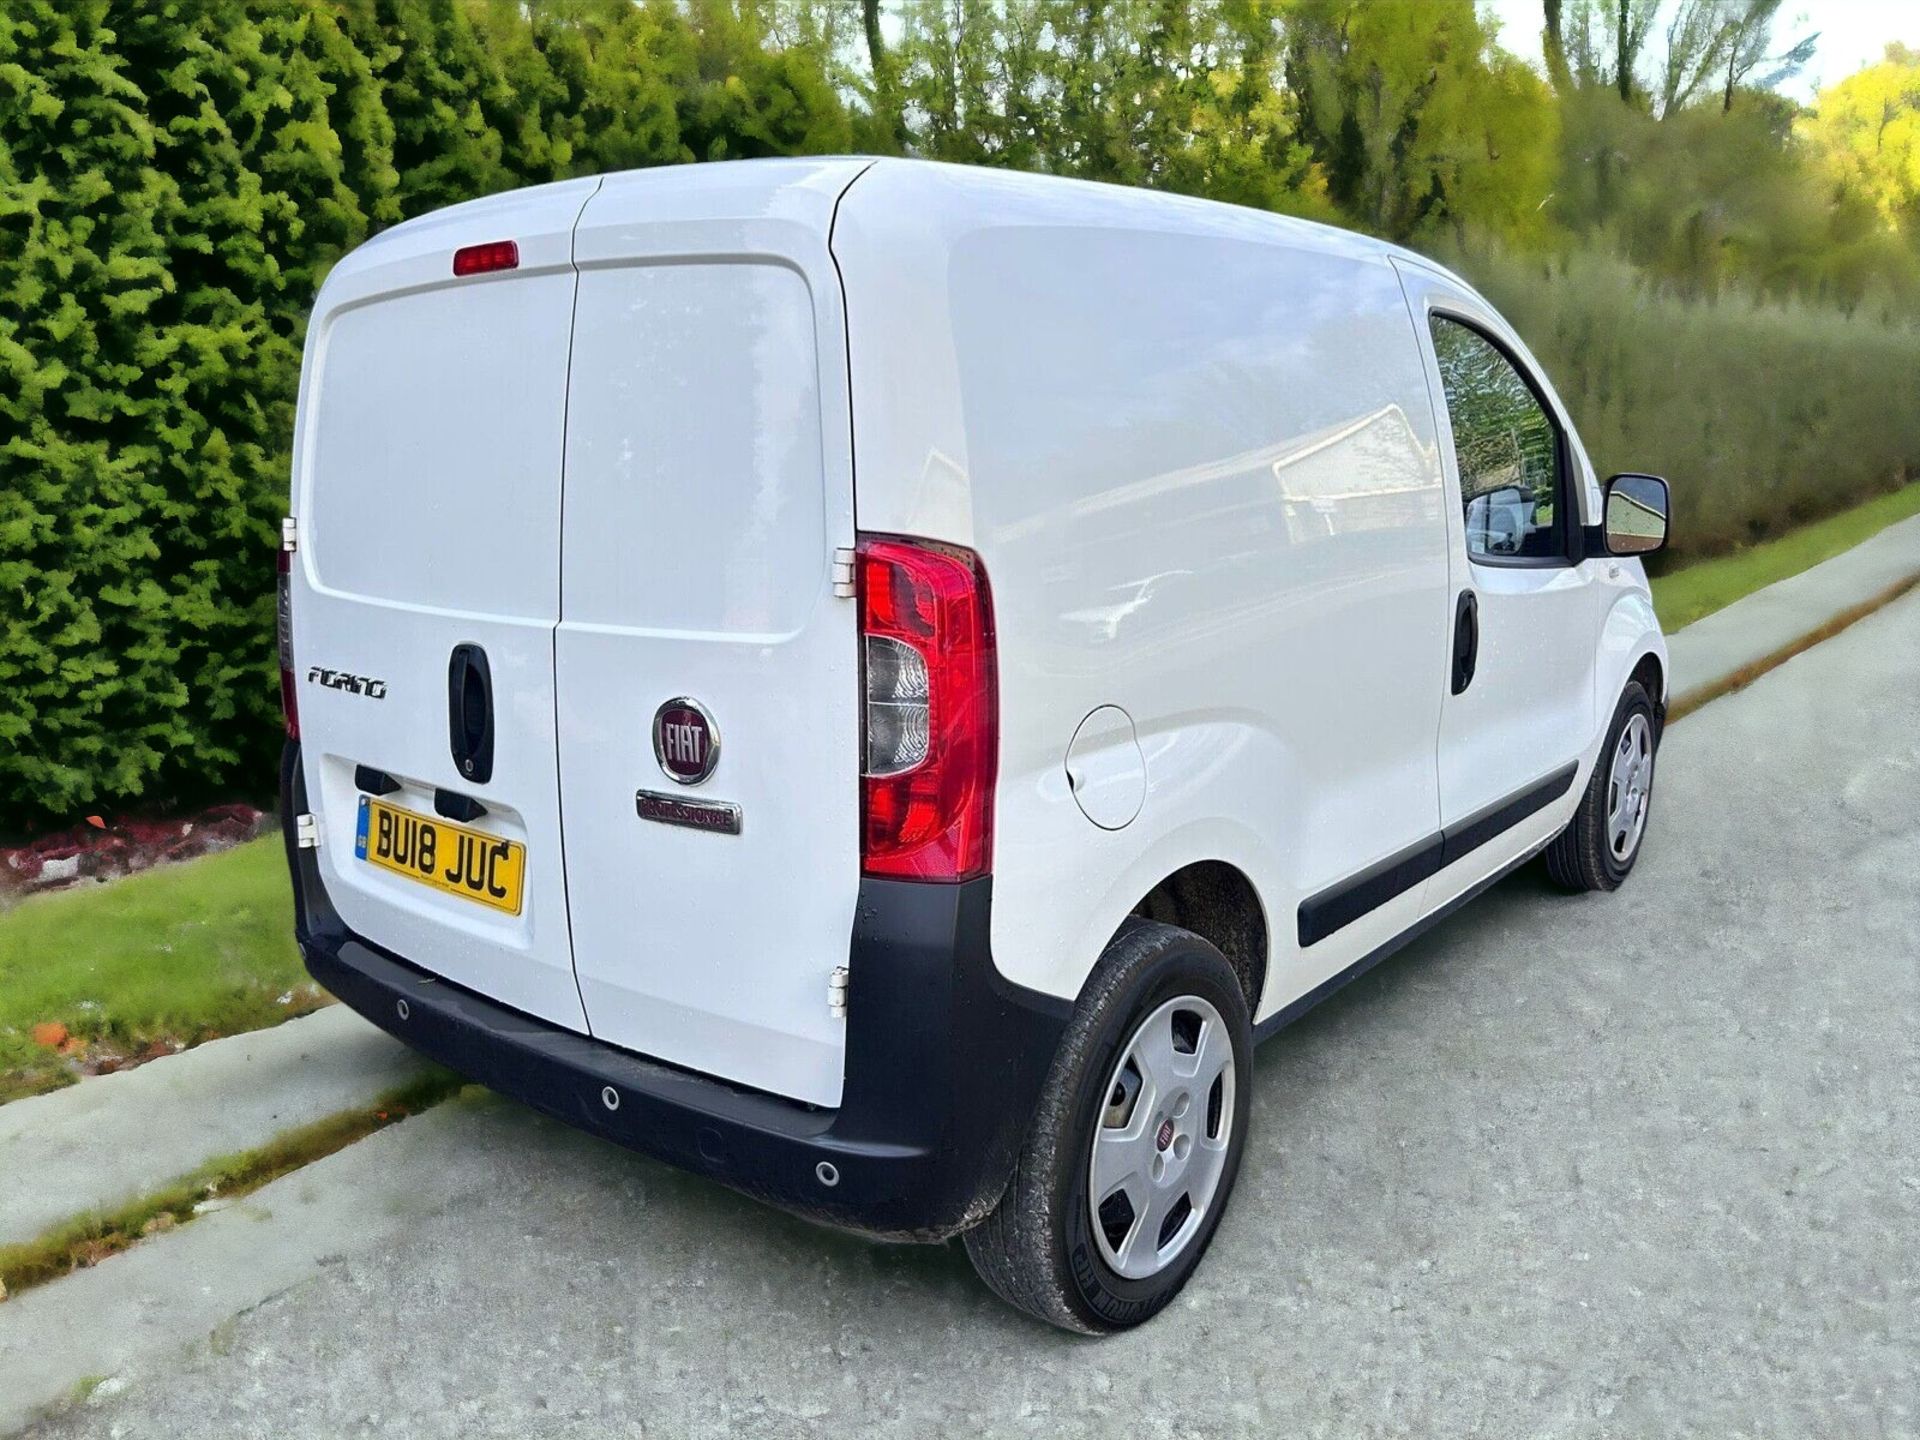 2018 FIAT FIORINO VAN - WELL-MAINTAINED, MOT UNTIL 04/2025, FULL SERVICE HISTORY - Image 2 of 6